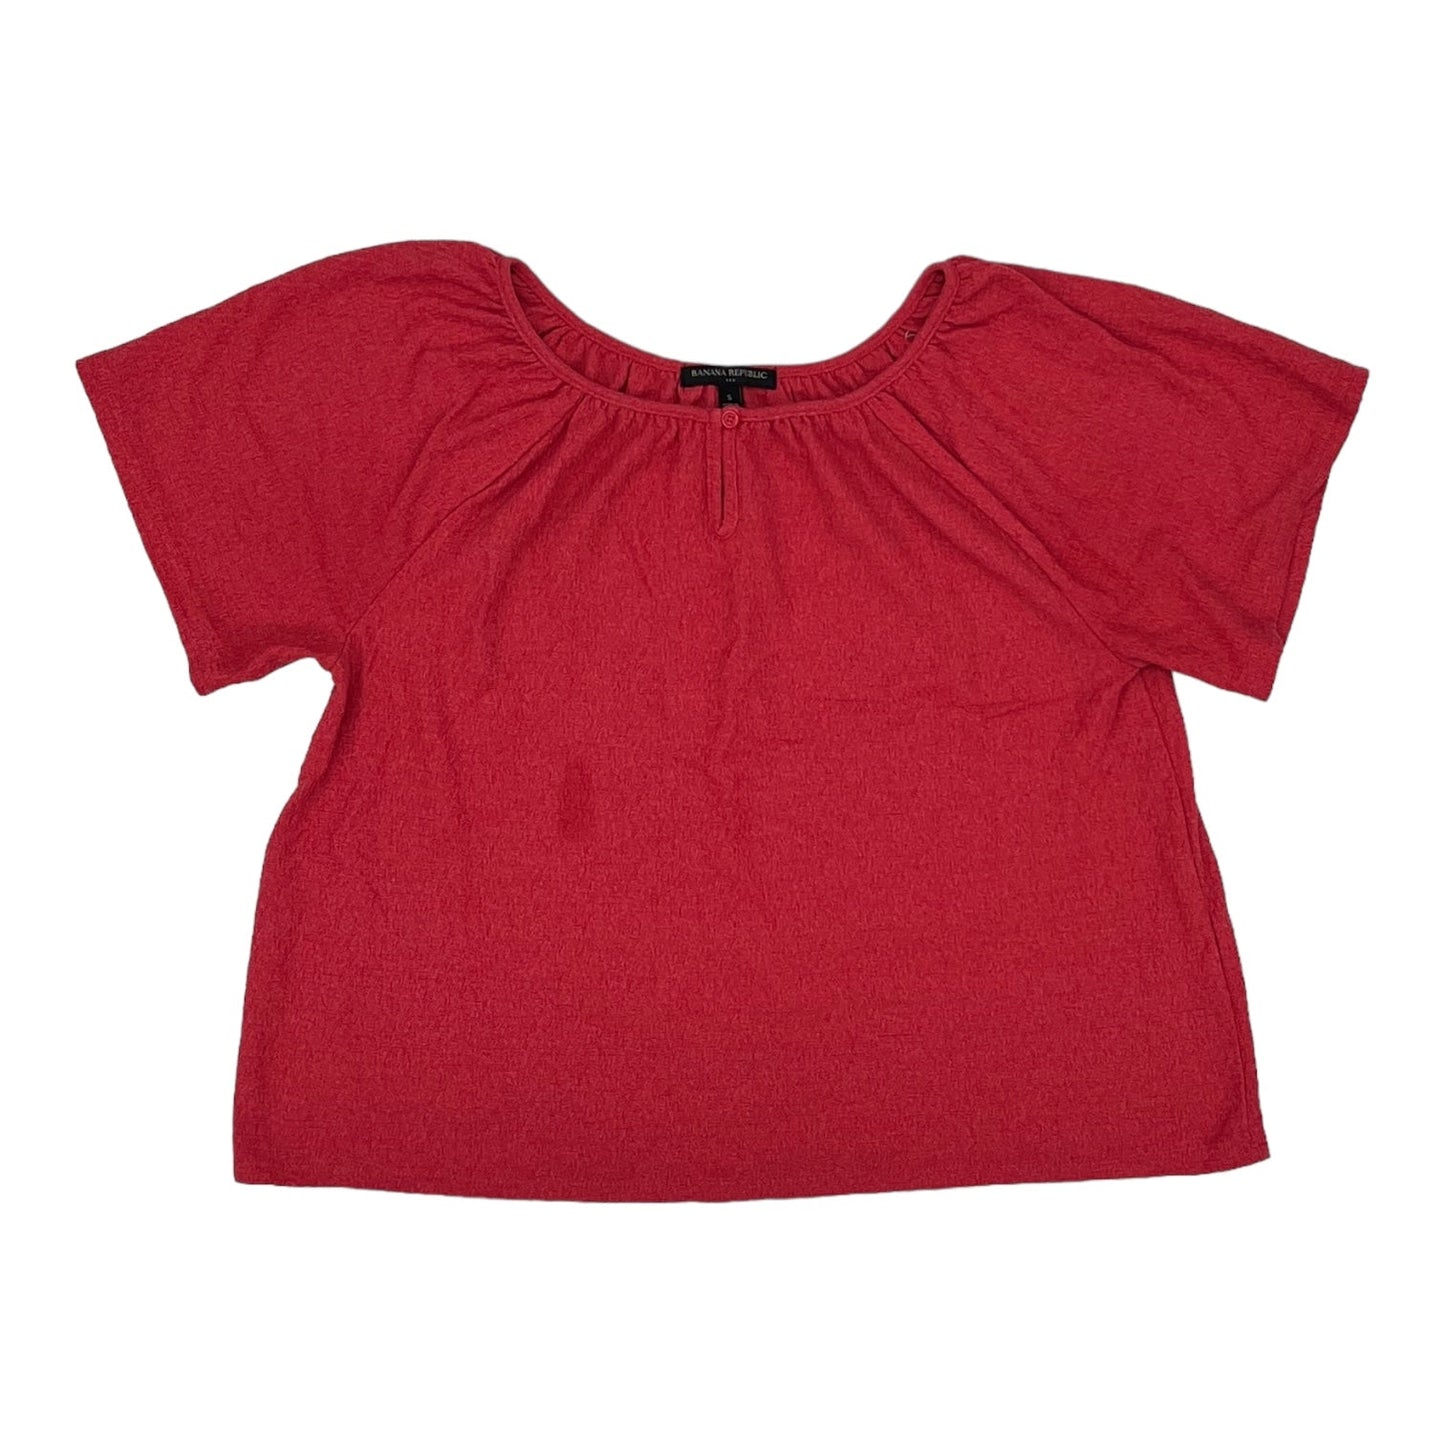 RED BANANA REPUBLIC TOP SS, Size S